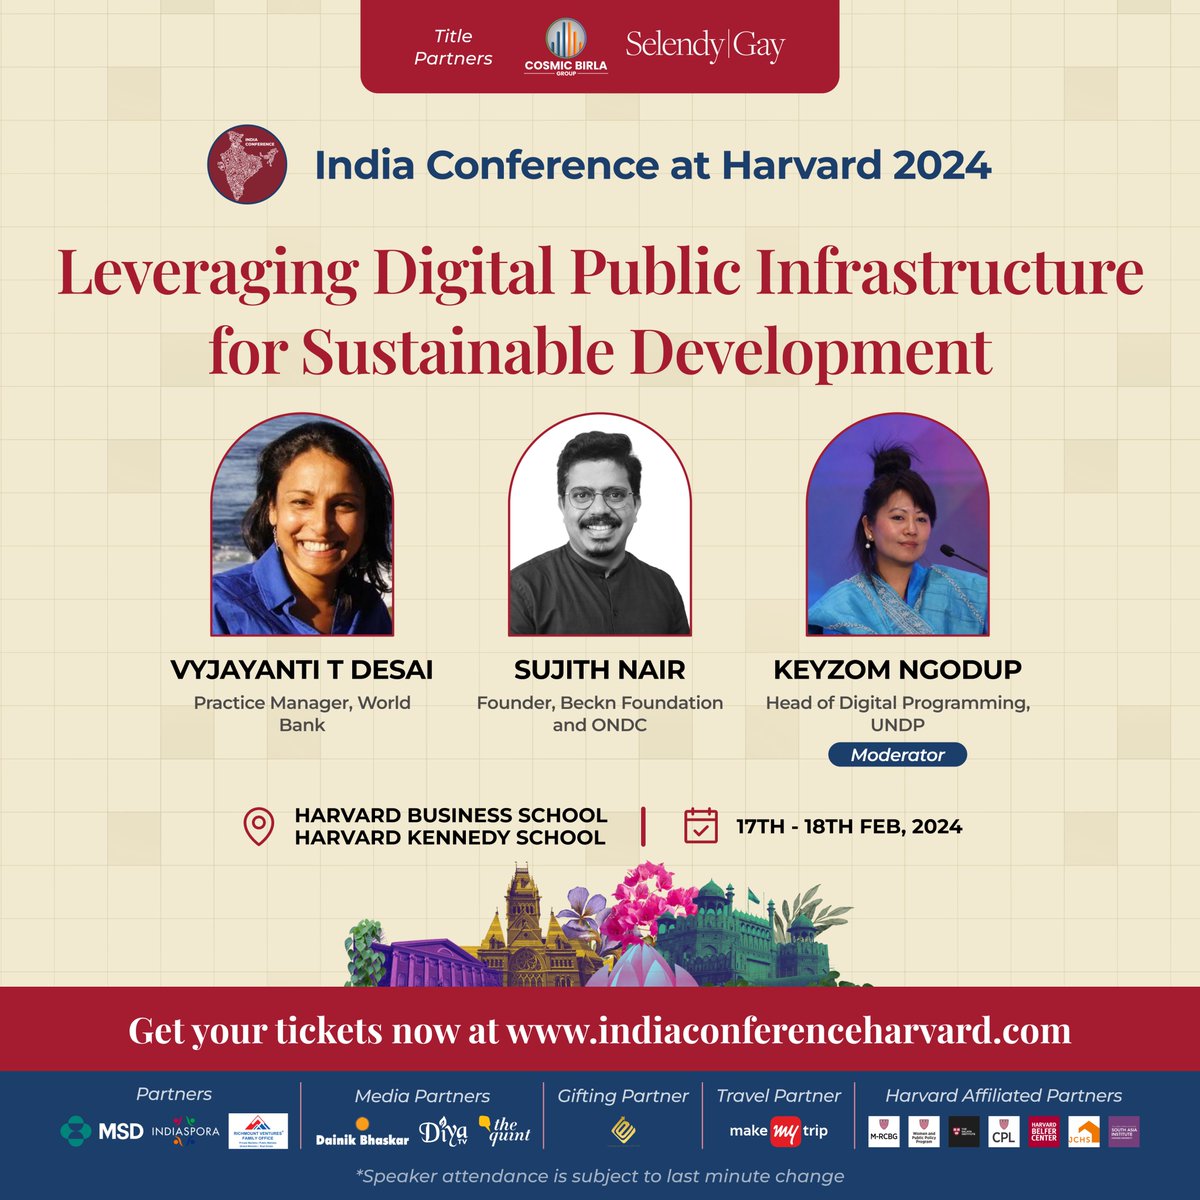 Join esteemed panelists @vyjayantidesai, Practice Manager at the World Bank, @SujithNairK, Founder of Beckn Foundation and ONDC, and @KeyzomN, Head of Digital Programming at UNDP, at the India Conference for an insightful discussion on leveraging DPI for sustainable development.